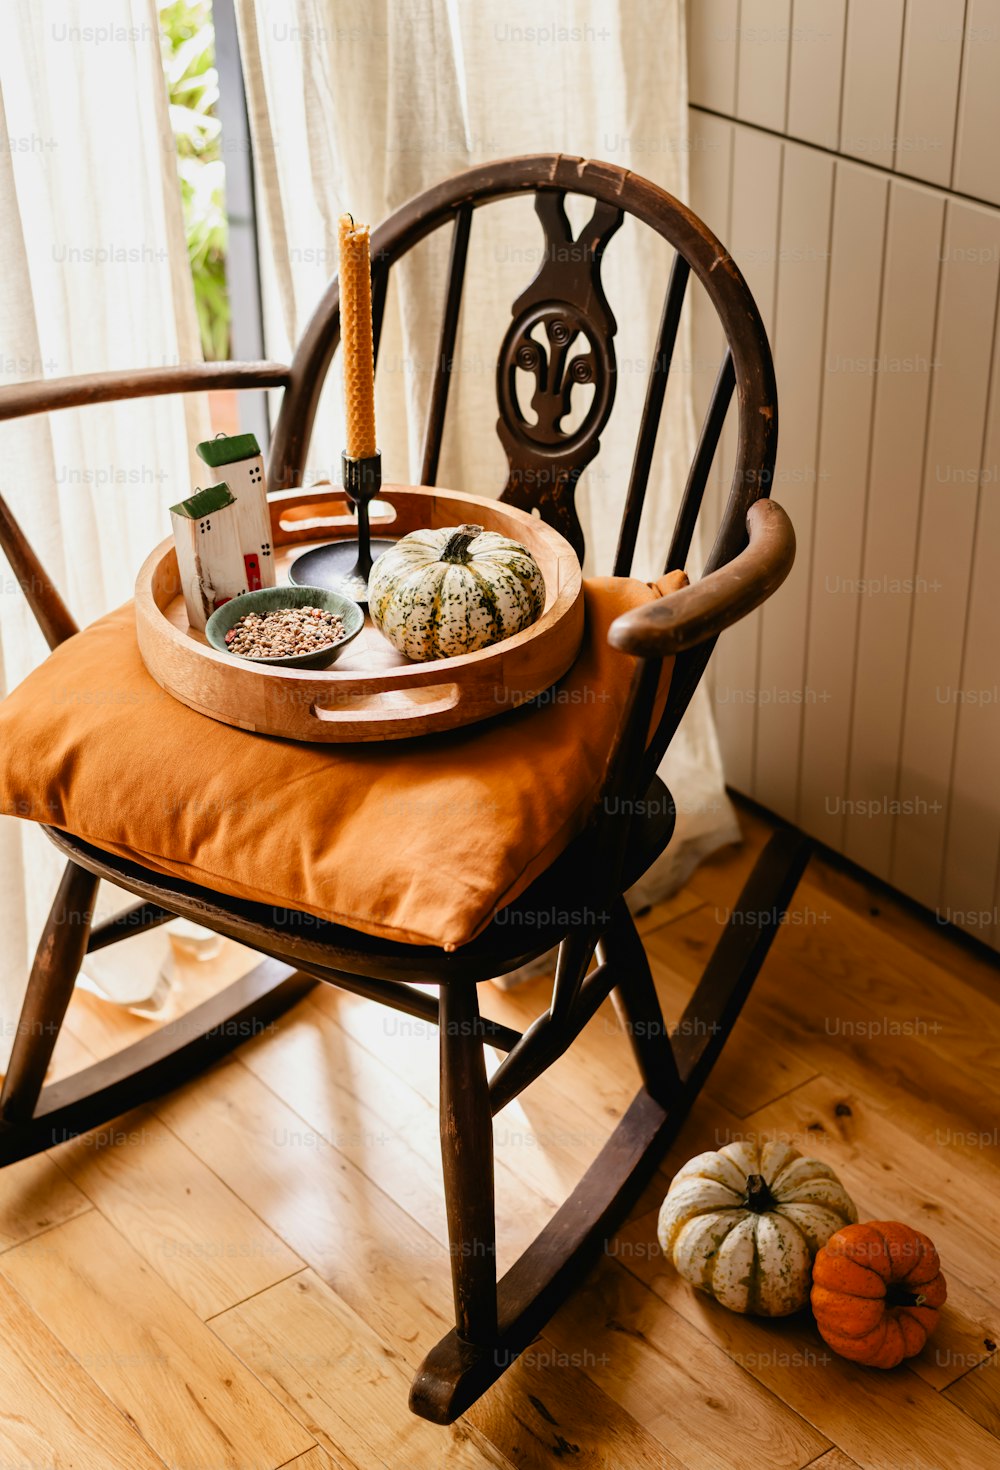 a wooden rocking chair with a tray of food on it